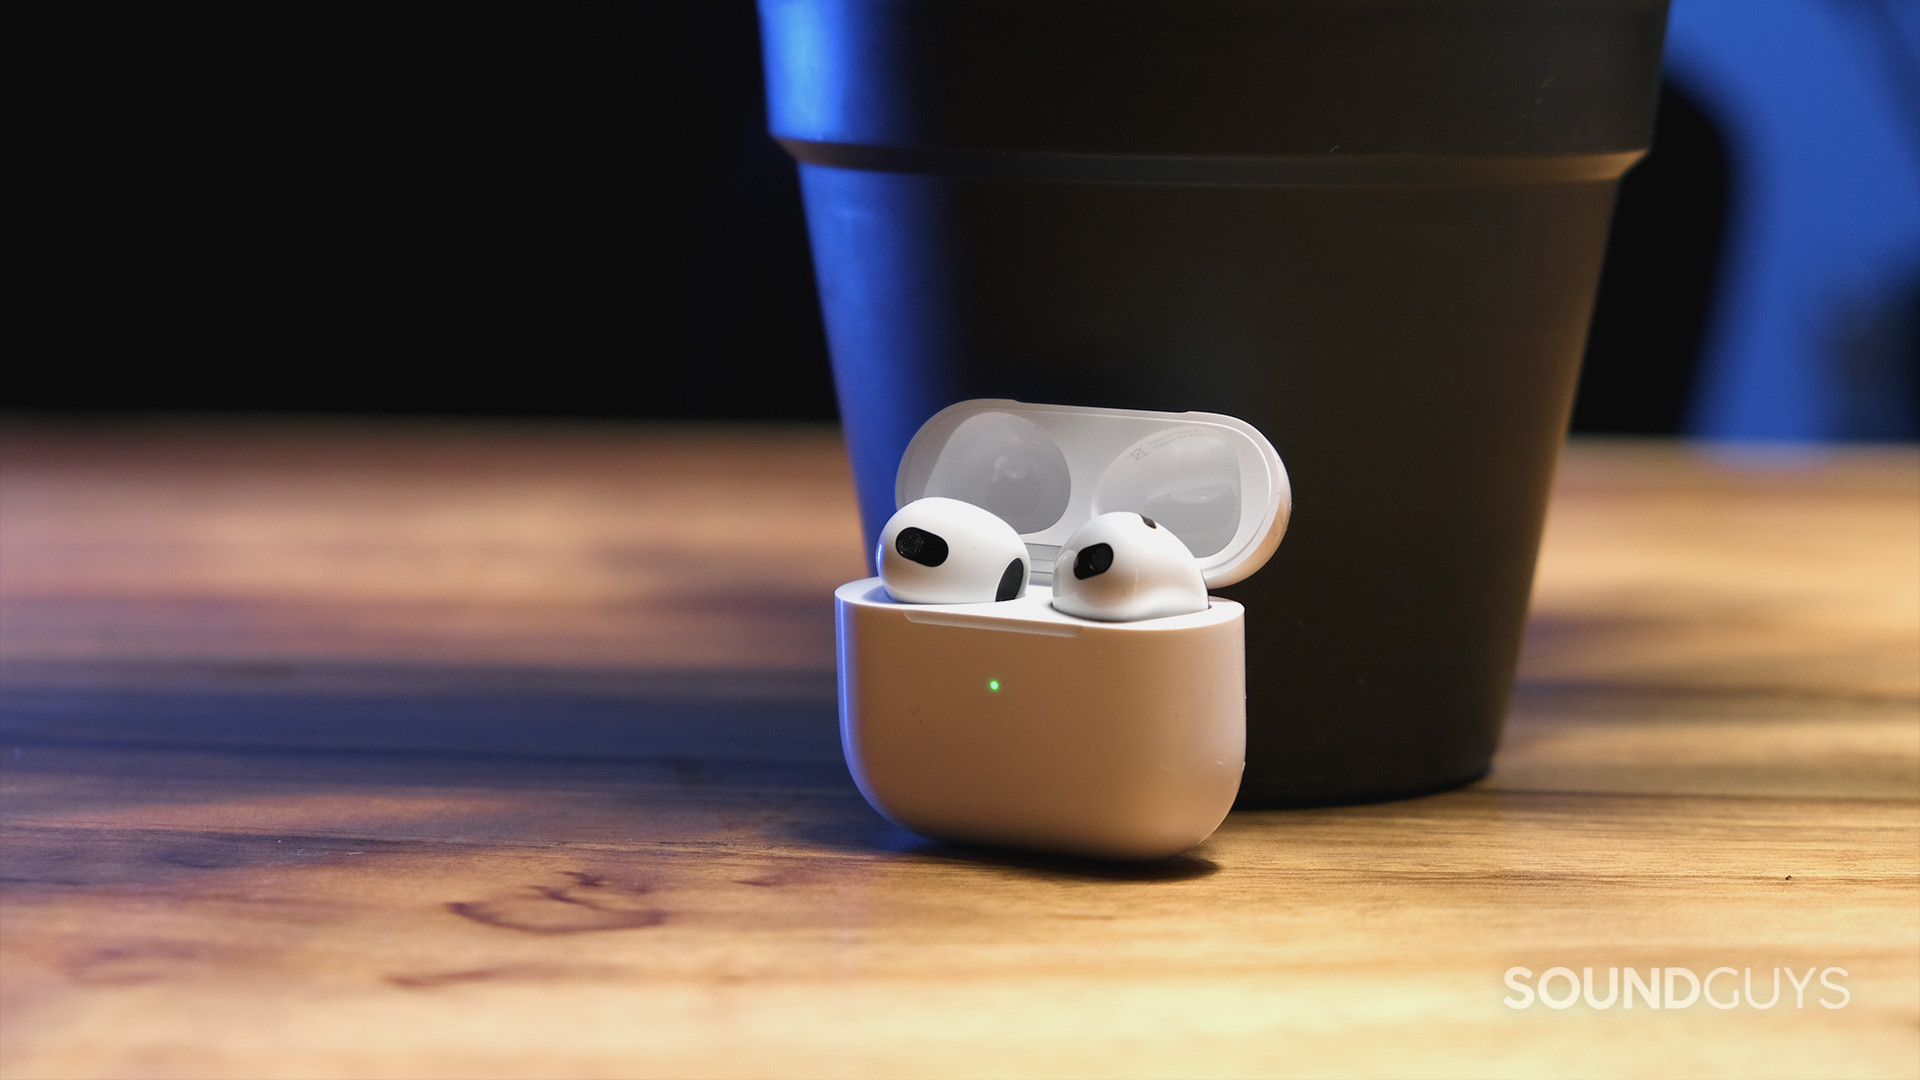 The Apple AirPods (3rd generation) open case holds the earbuds and sits on a wooden surface.